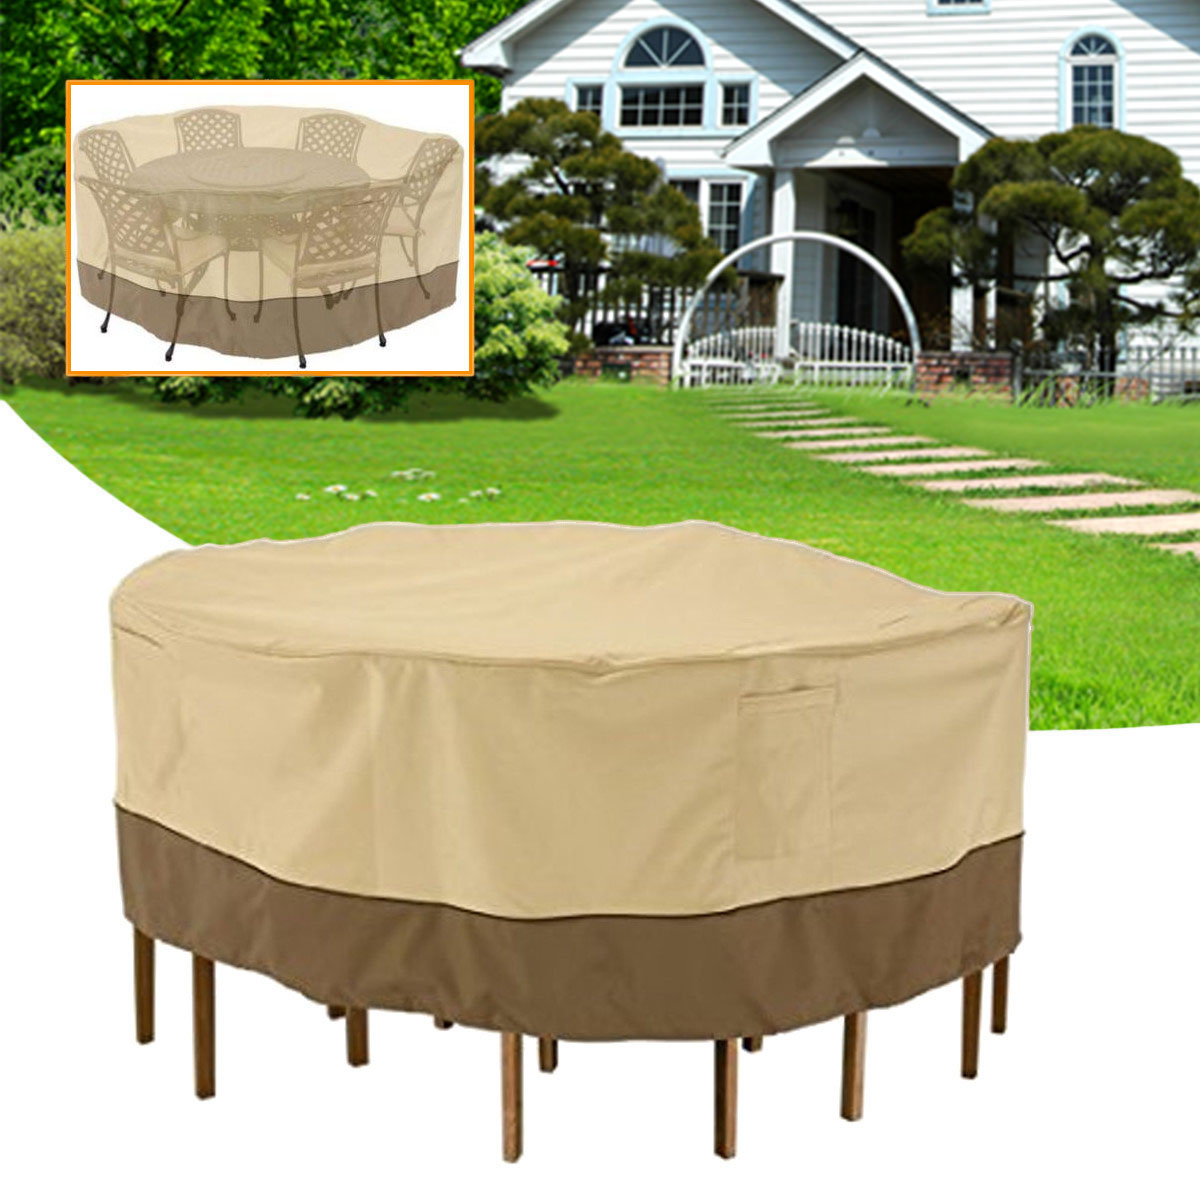 Garden Round Waterproof Table Cover Patio Outdoor Furniture Set Shelter Protection